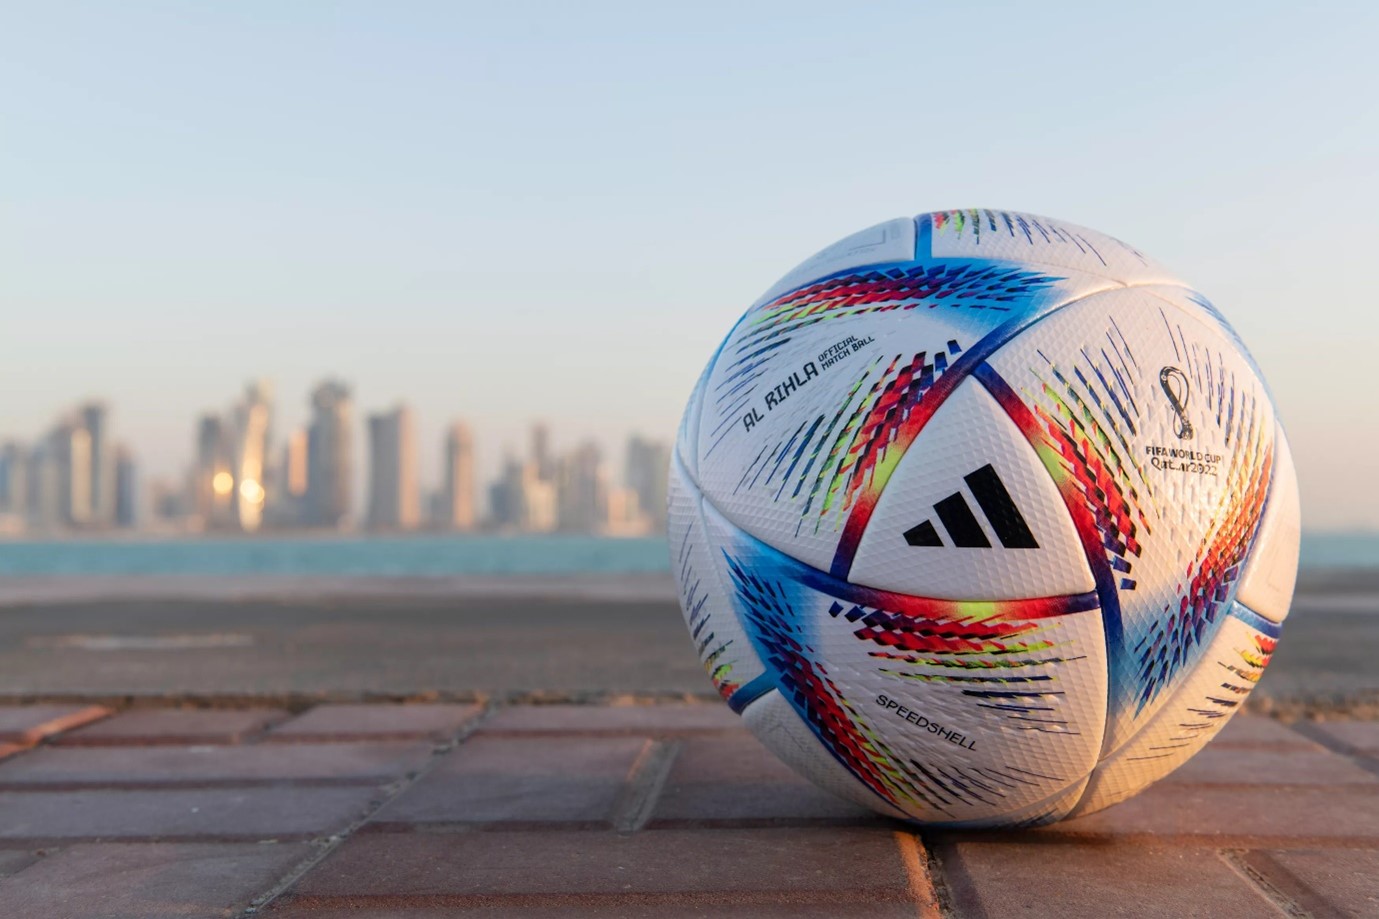 Figure 1 Official ball for the FIFA World Cup. Image courtesy FIFA.com